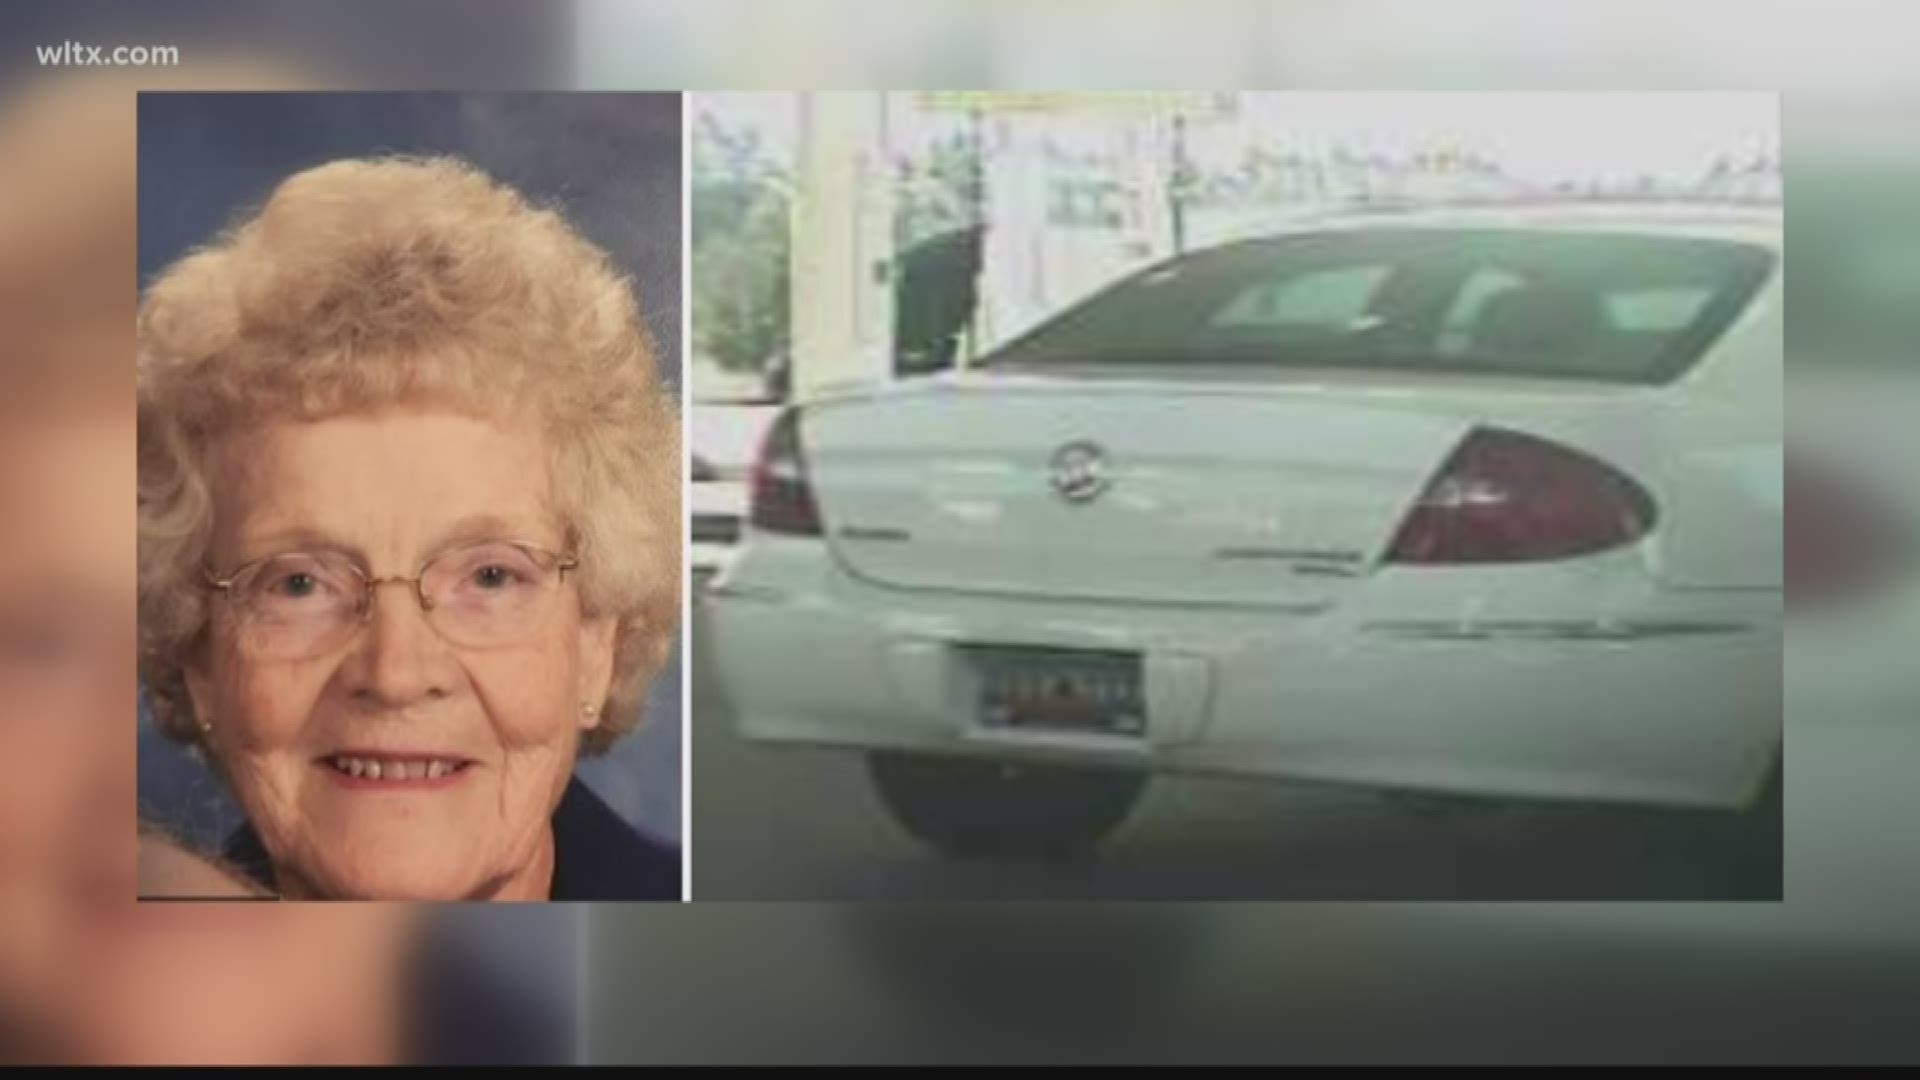 Officers says Liliah Smith - lied to police as they were searching for 85-year-old Jaxie Rogers.